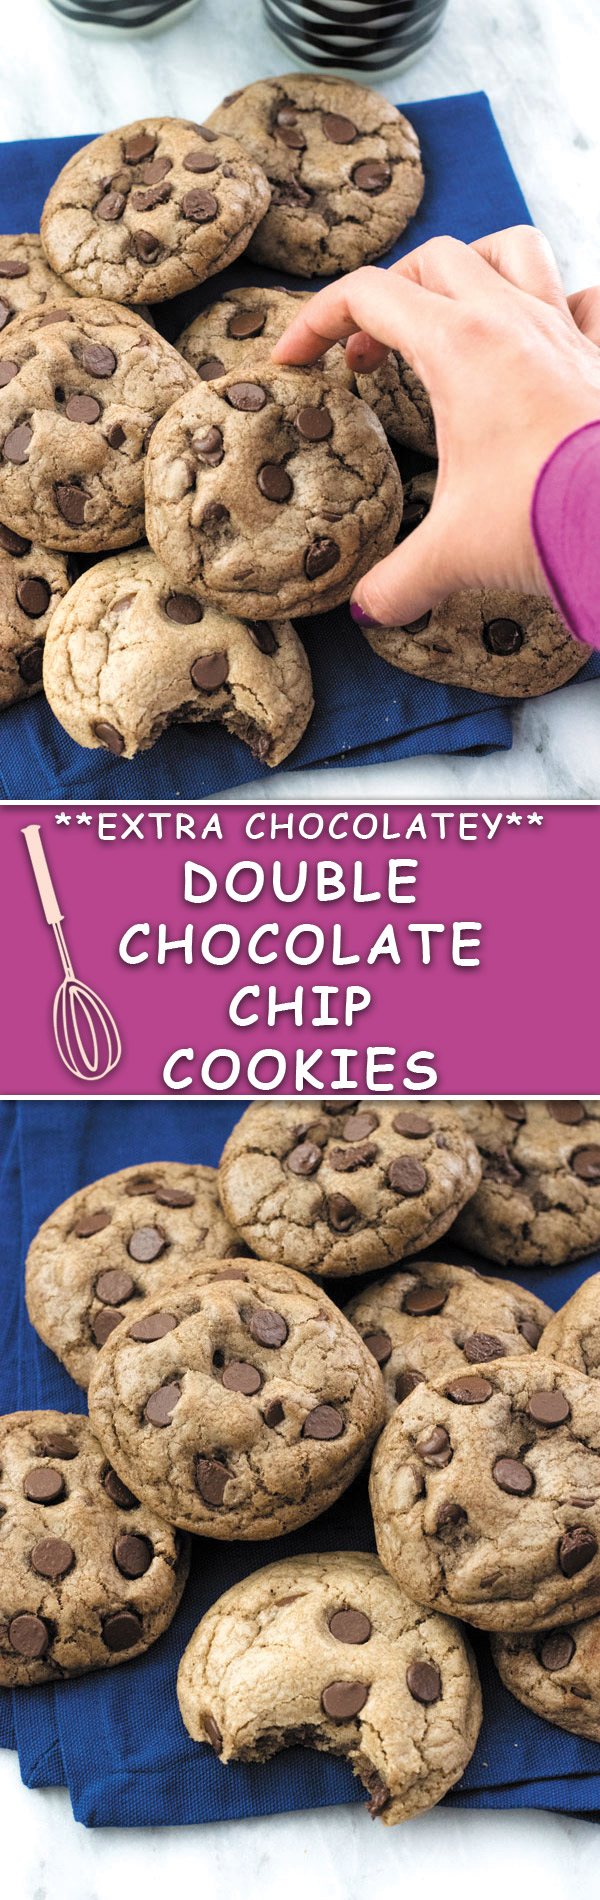 Double Chocolate Chip Cookies - THICK & CHEWY, extra Chocolatey, these cookies are LOVED by all ages! Simple to make, these are way better than store bought anytime!